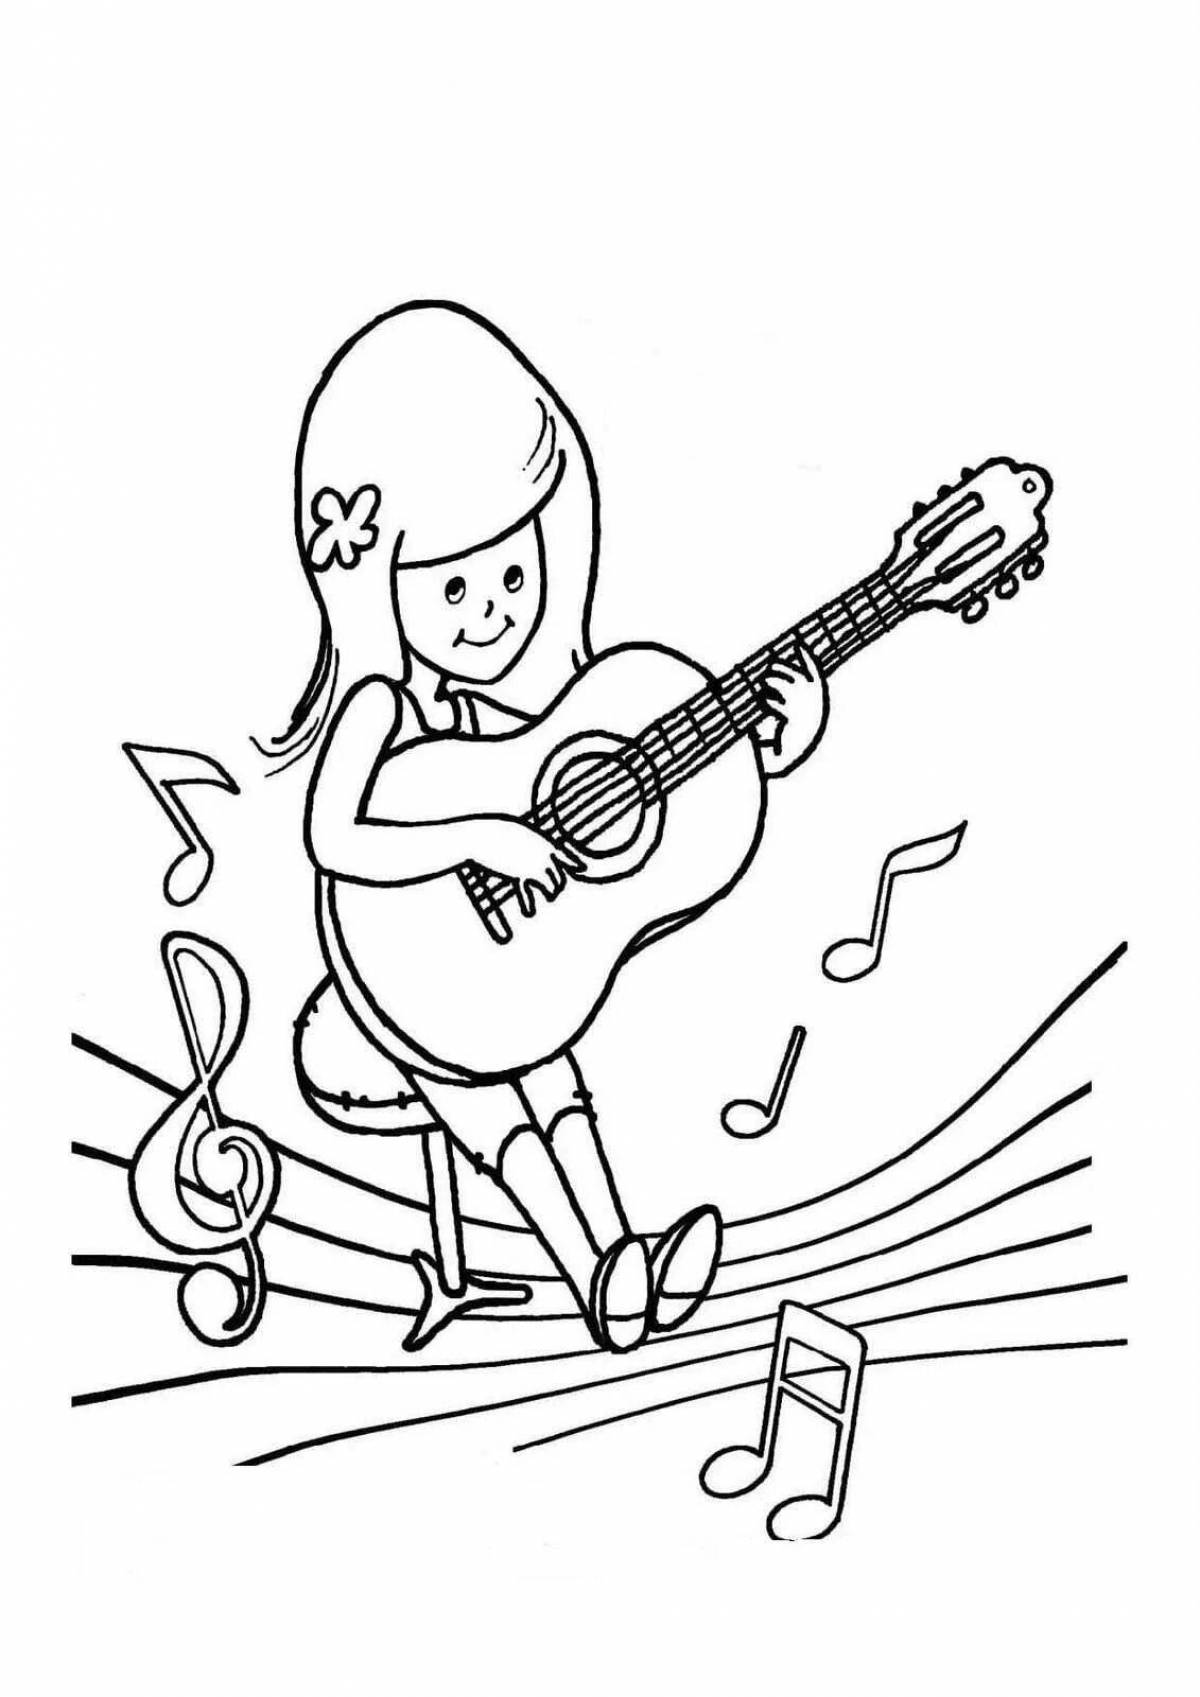 Charming musician coloring book